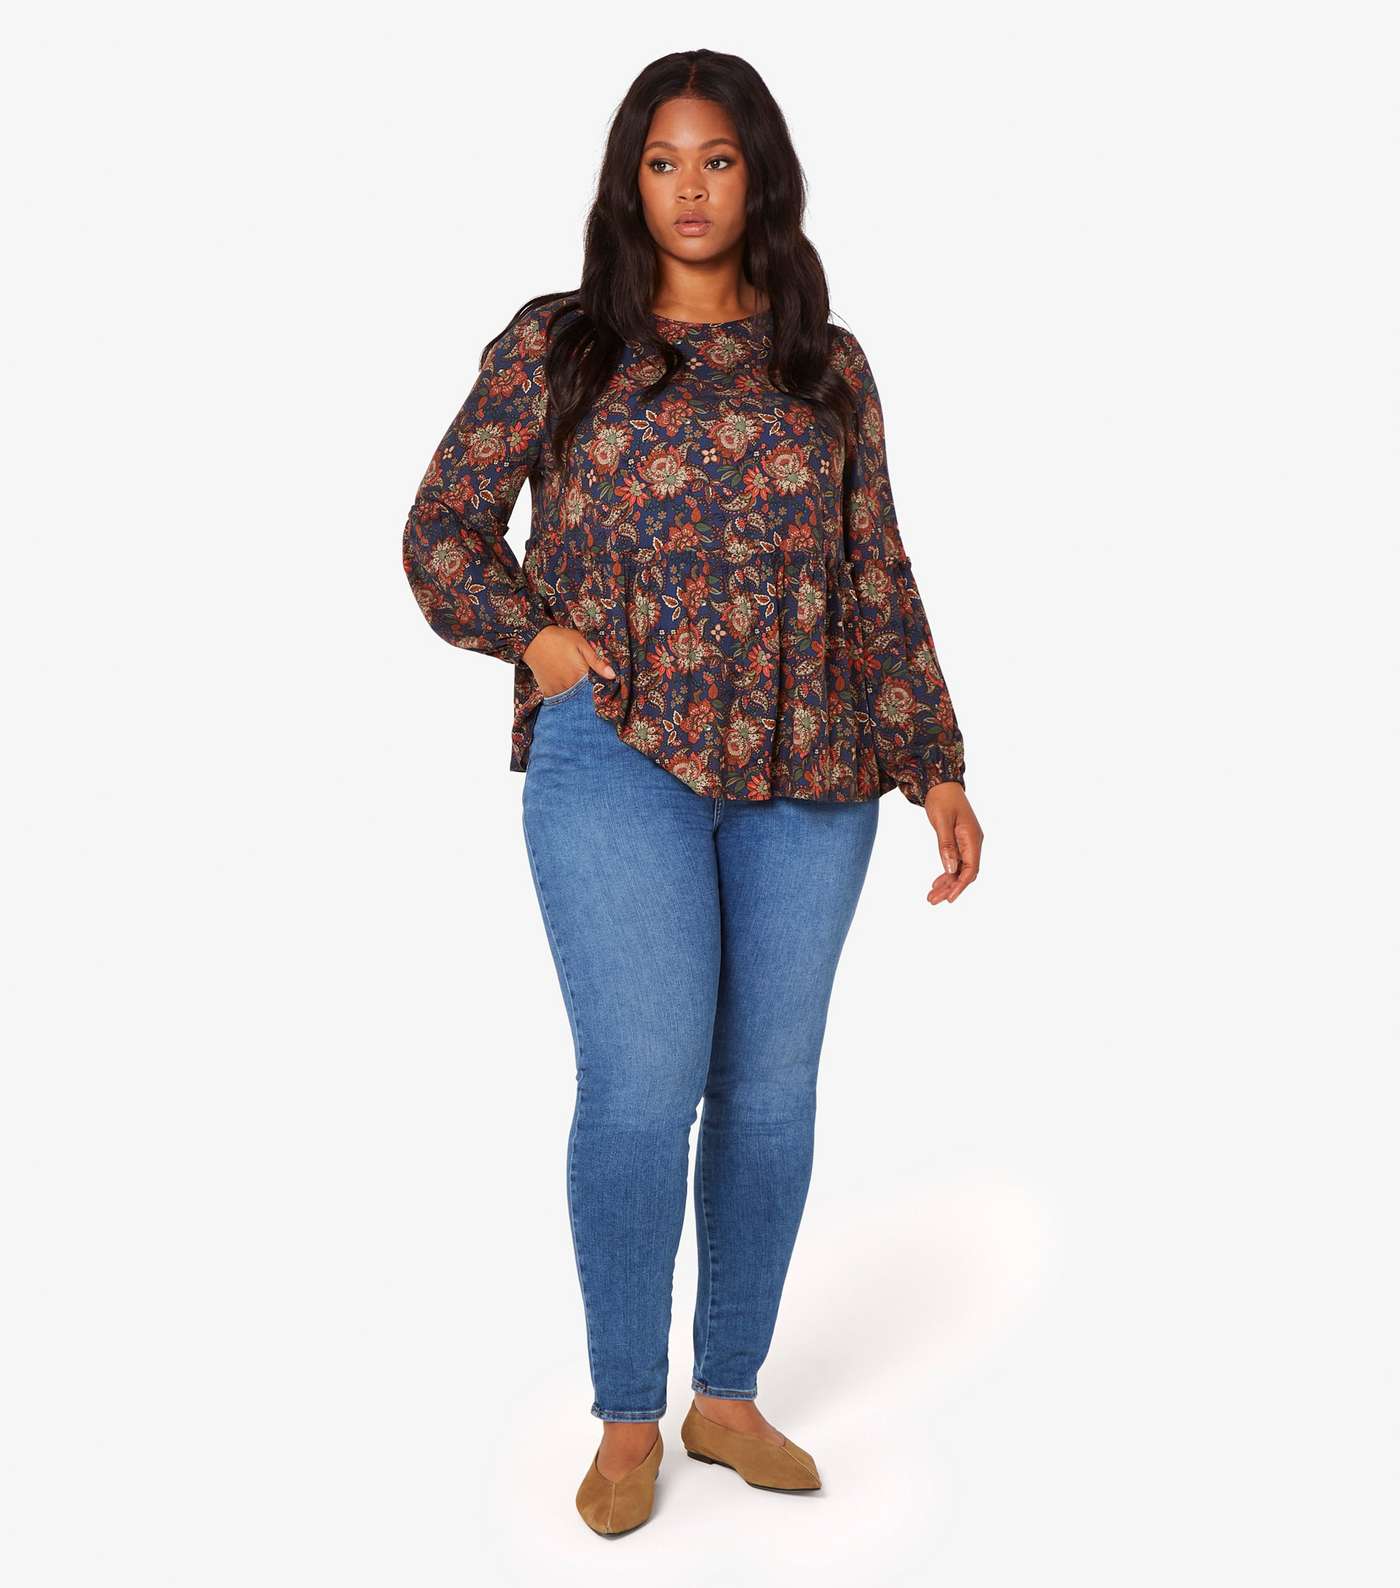 Apricot Curves Navy Floral Ruffle Hem Top Image 2